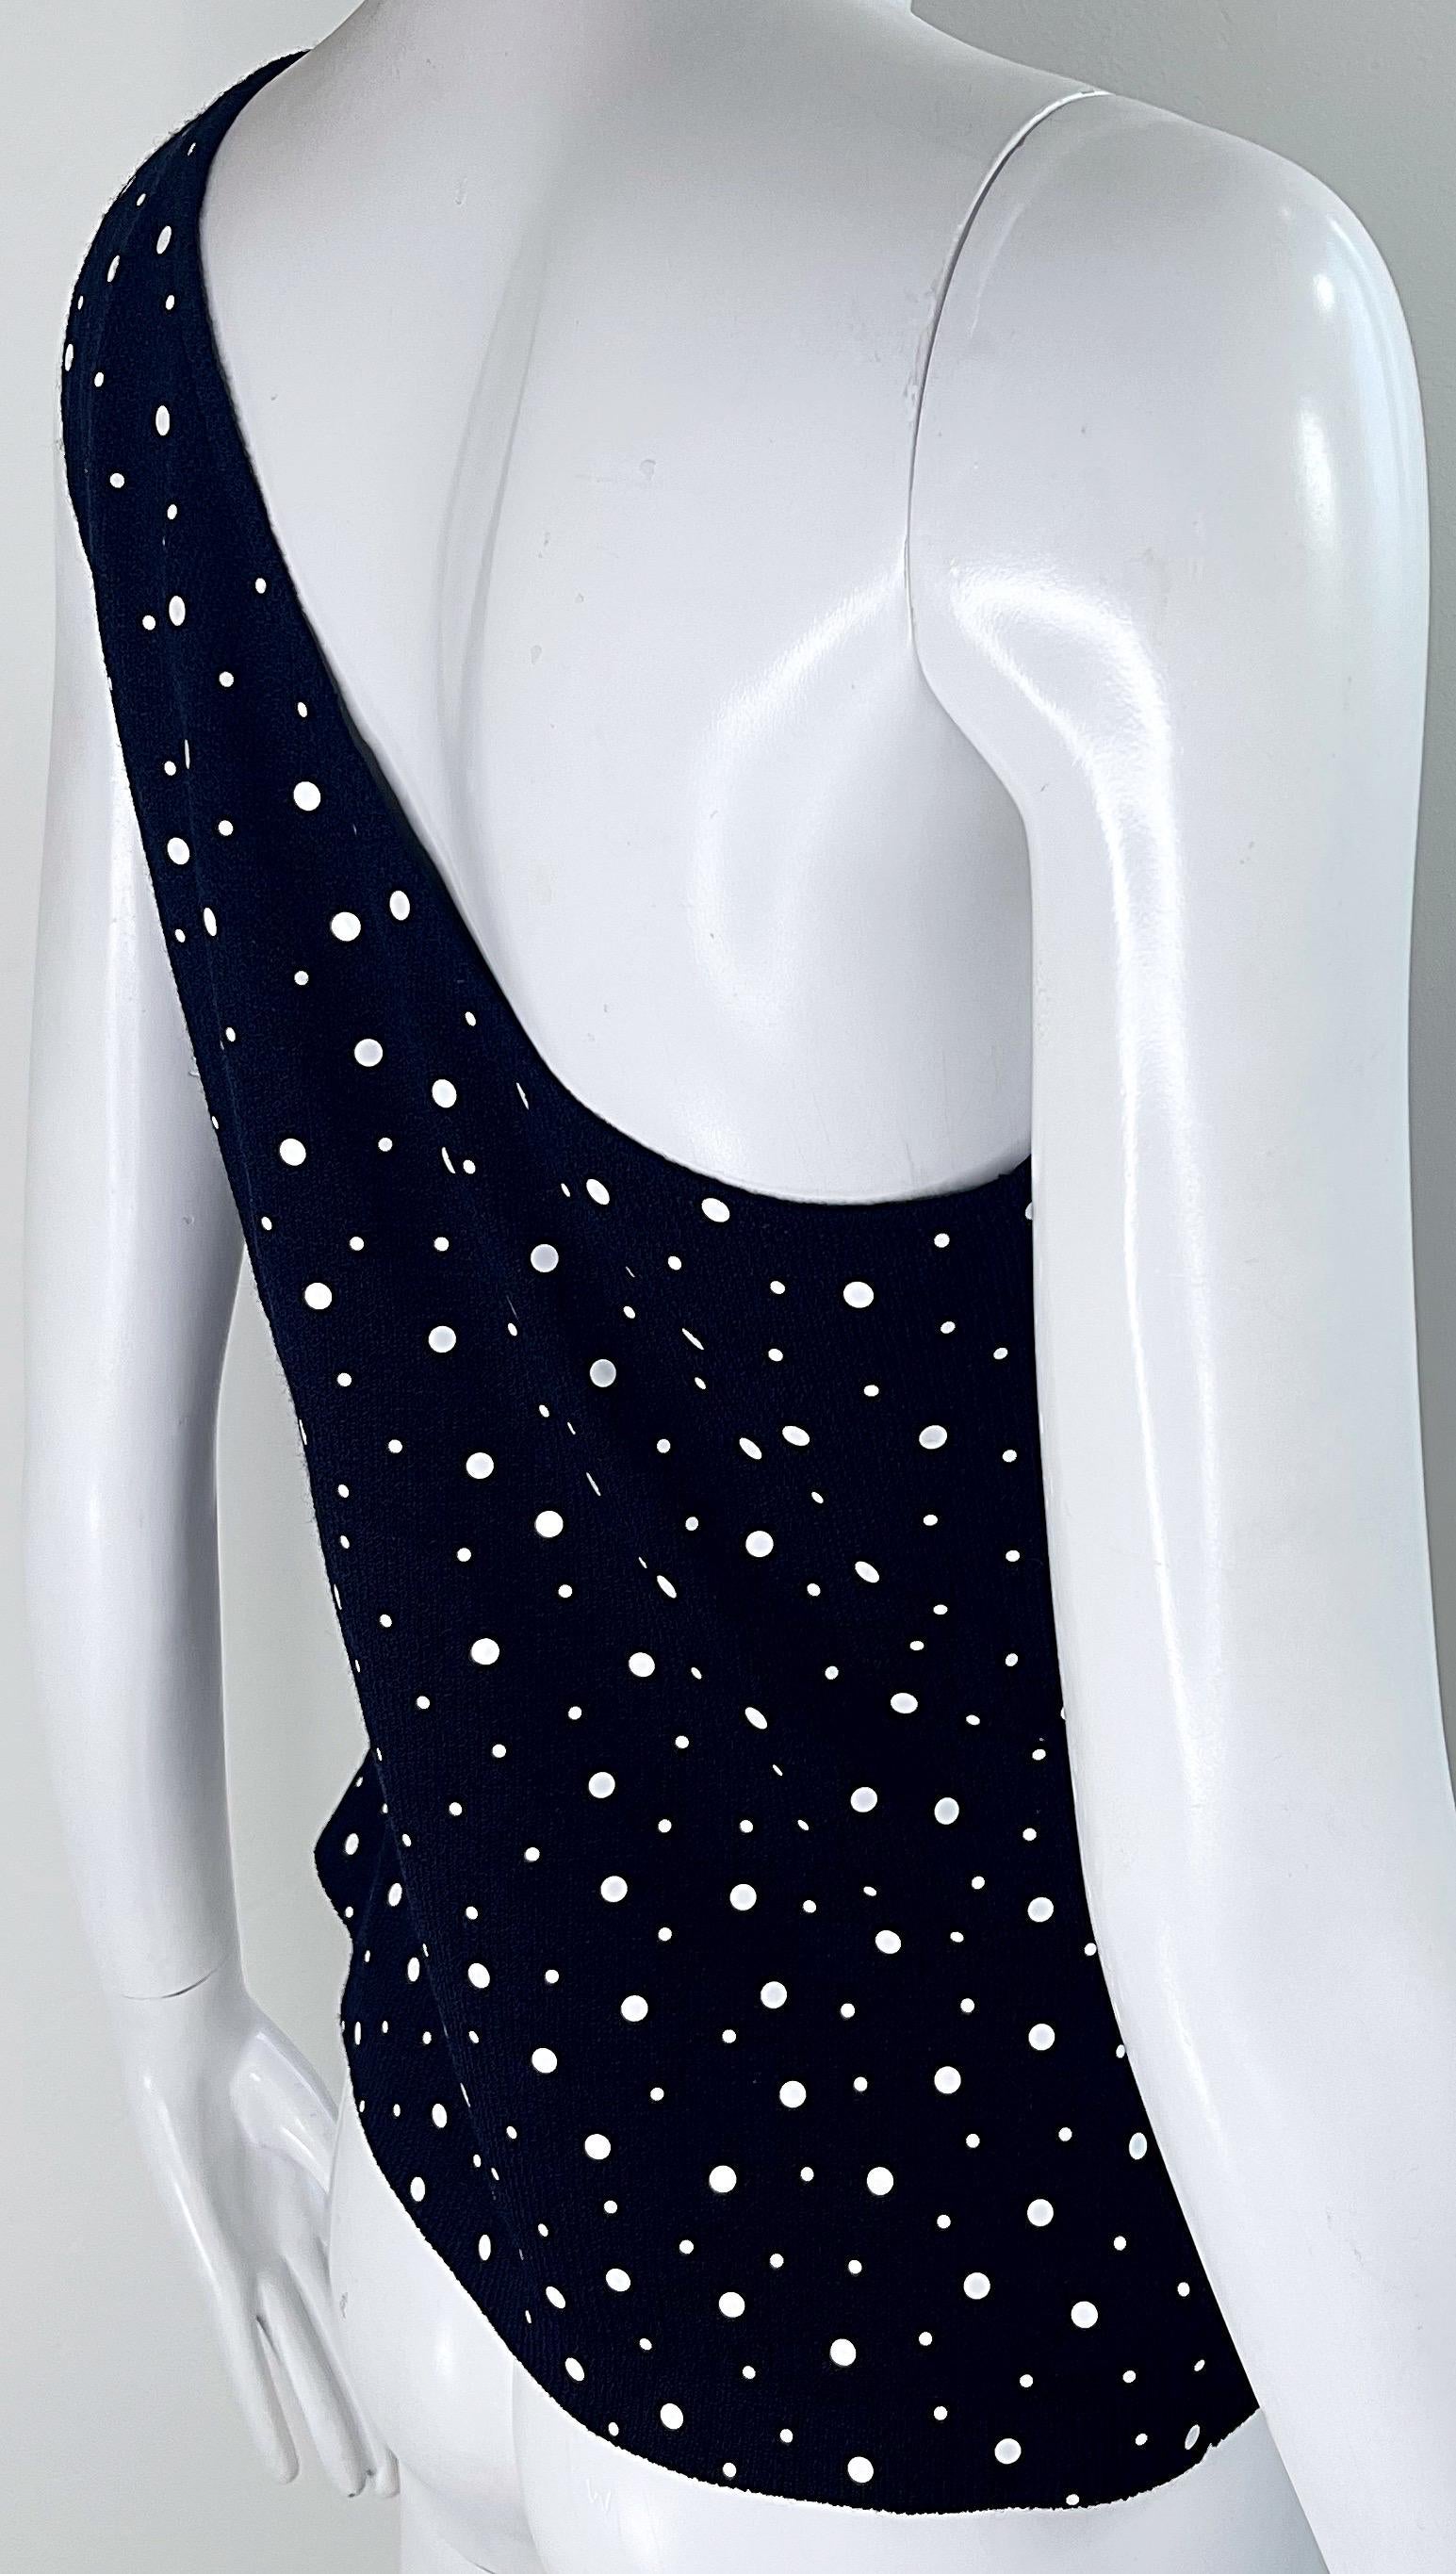 NWT 1990s St. John Collection by Marie Gray Size 8 Black White Polka Dot Top For Sale 8